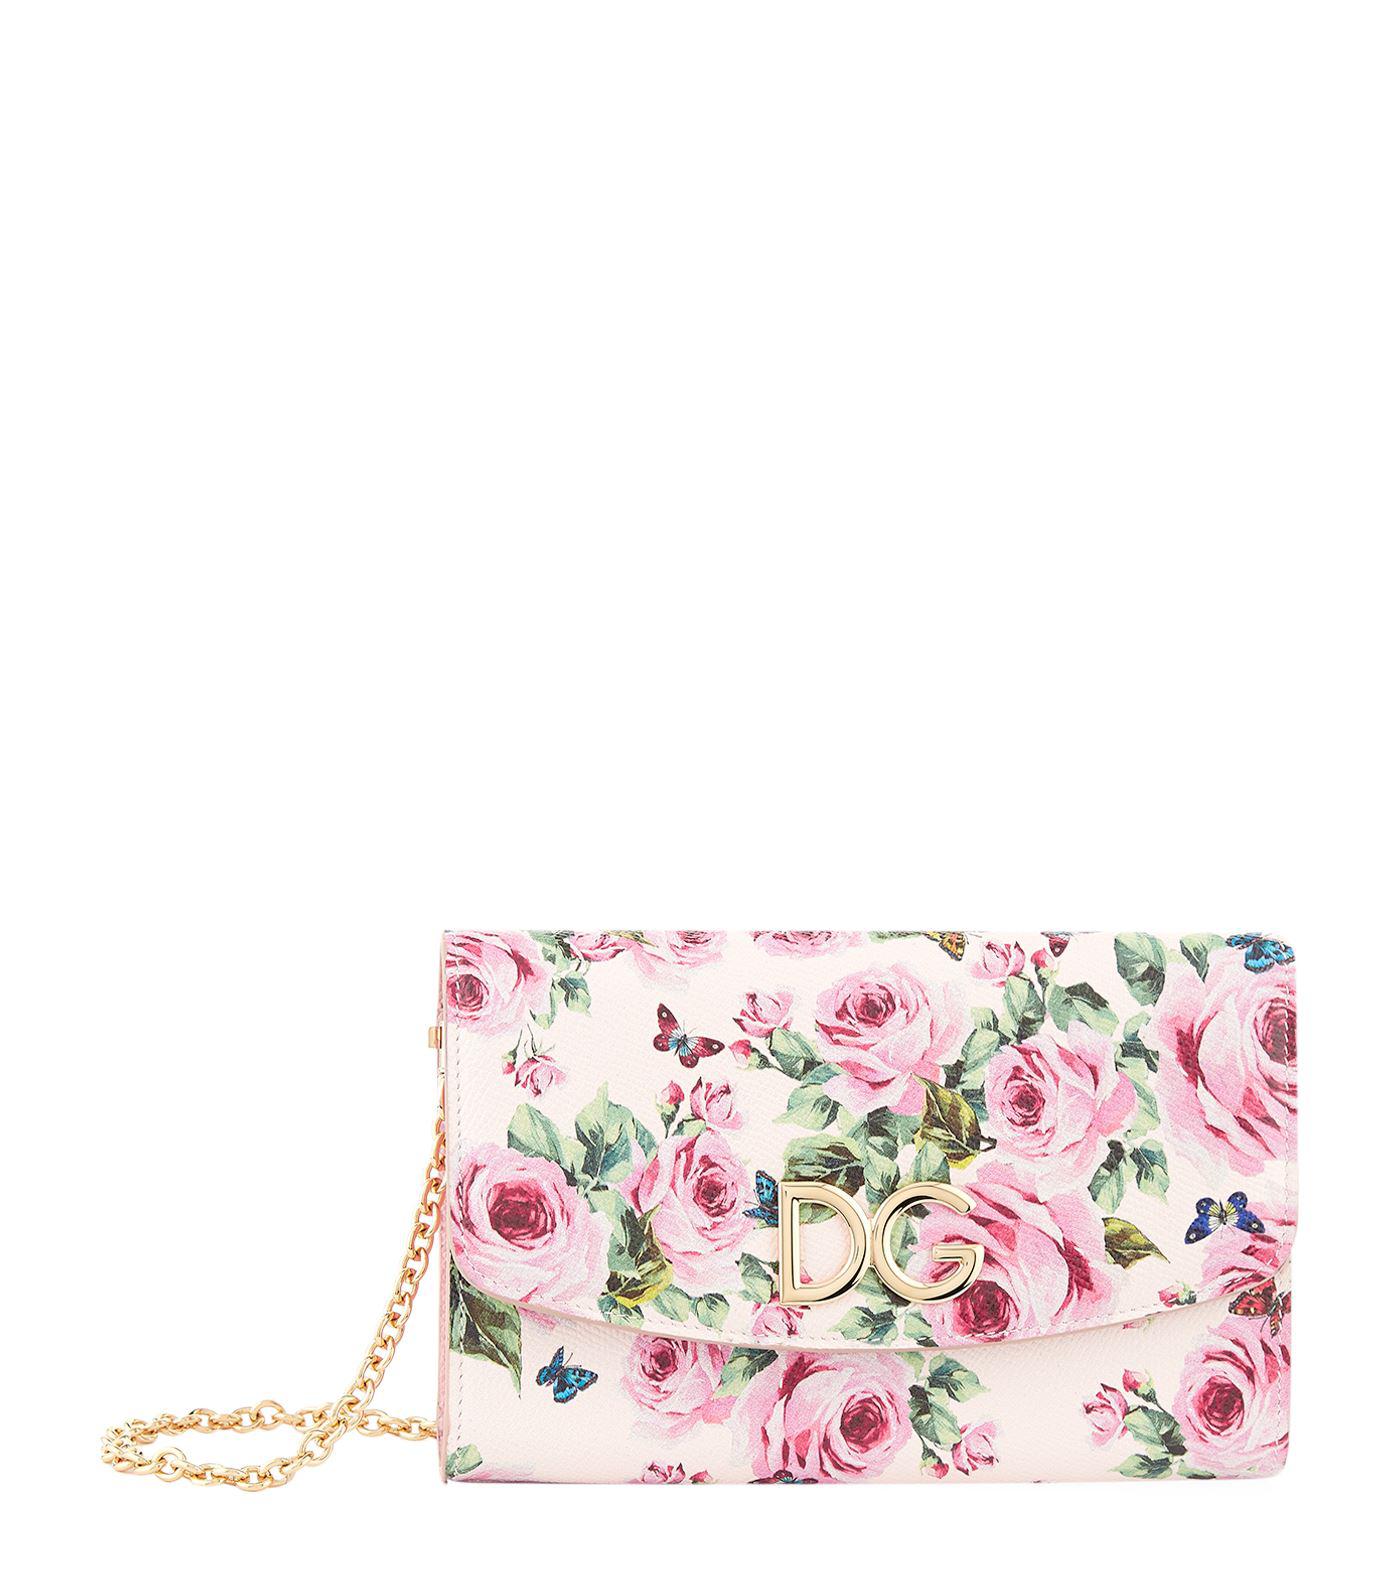 Dolce & Gabbana Rose Print Leather Wallet Bag in Pink | Lyst